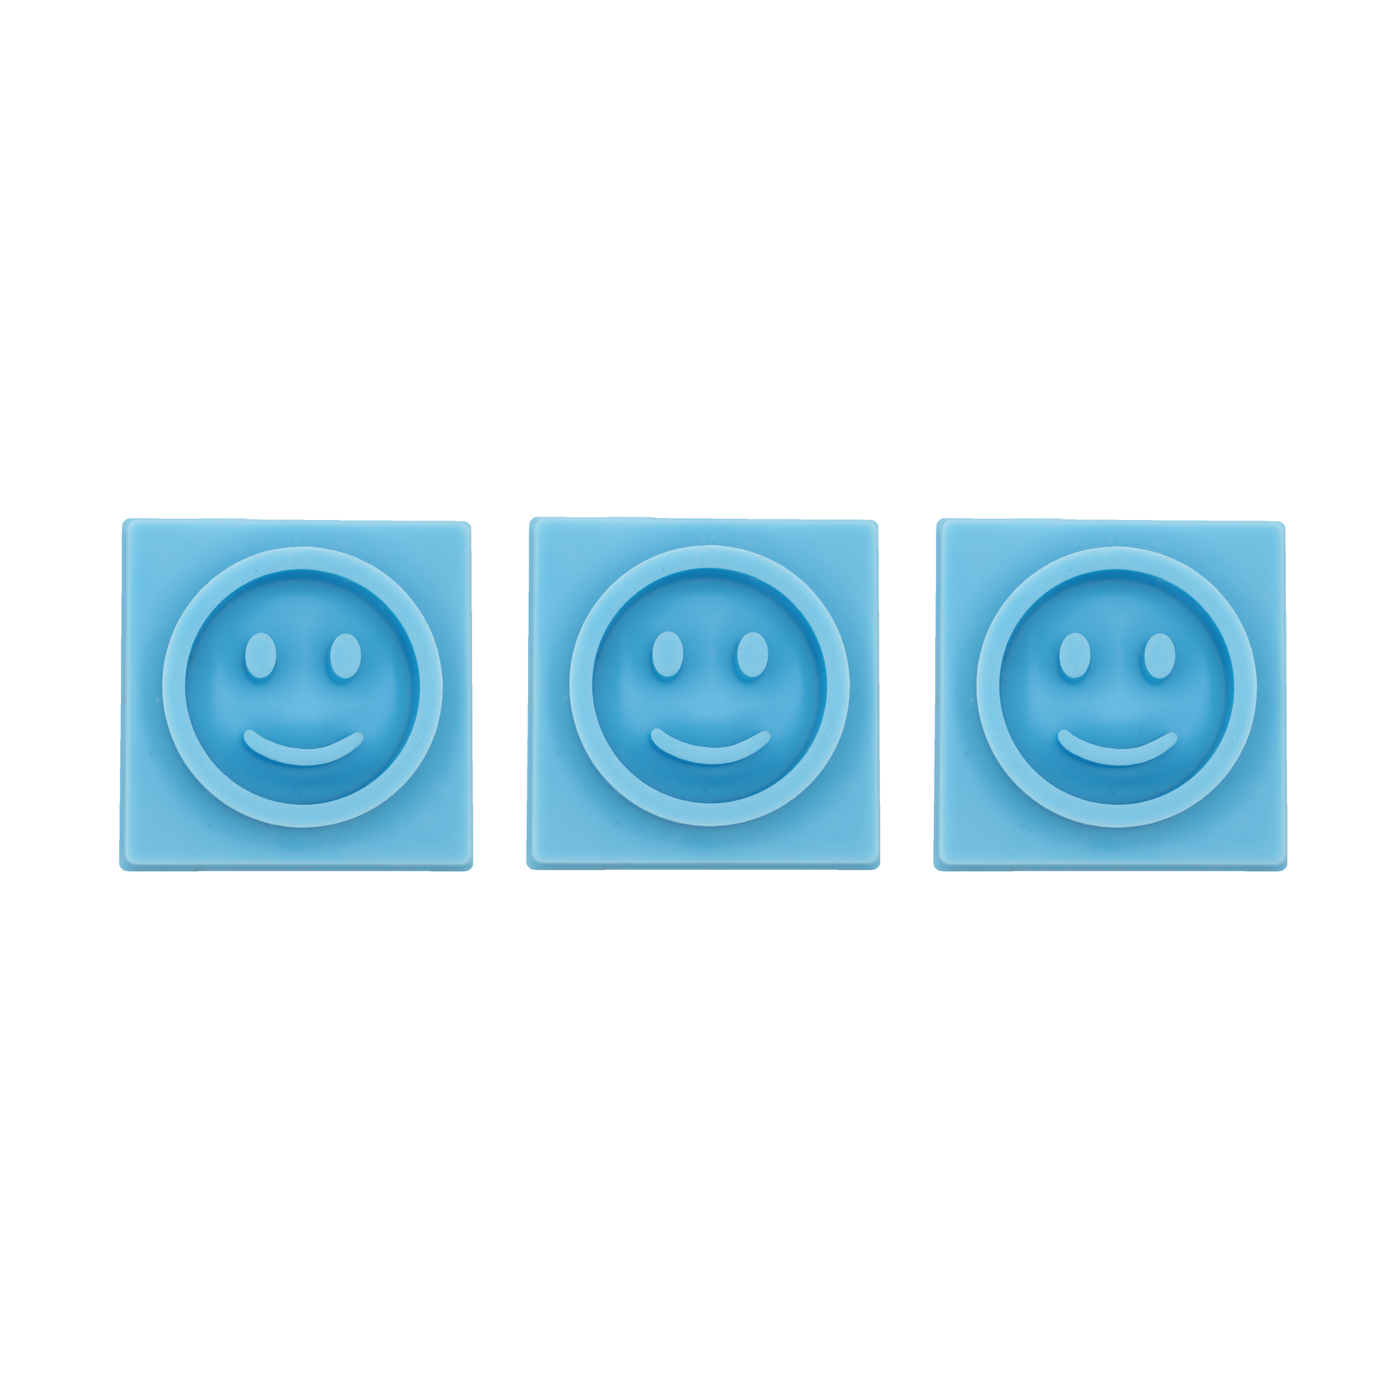 Smiley Face Inserts - 3 Pack